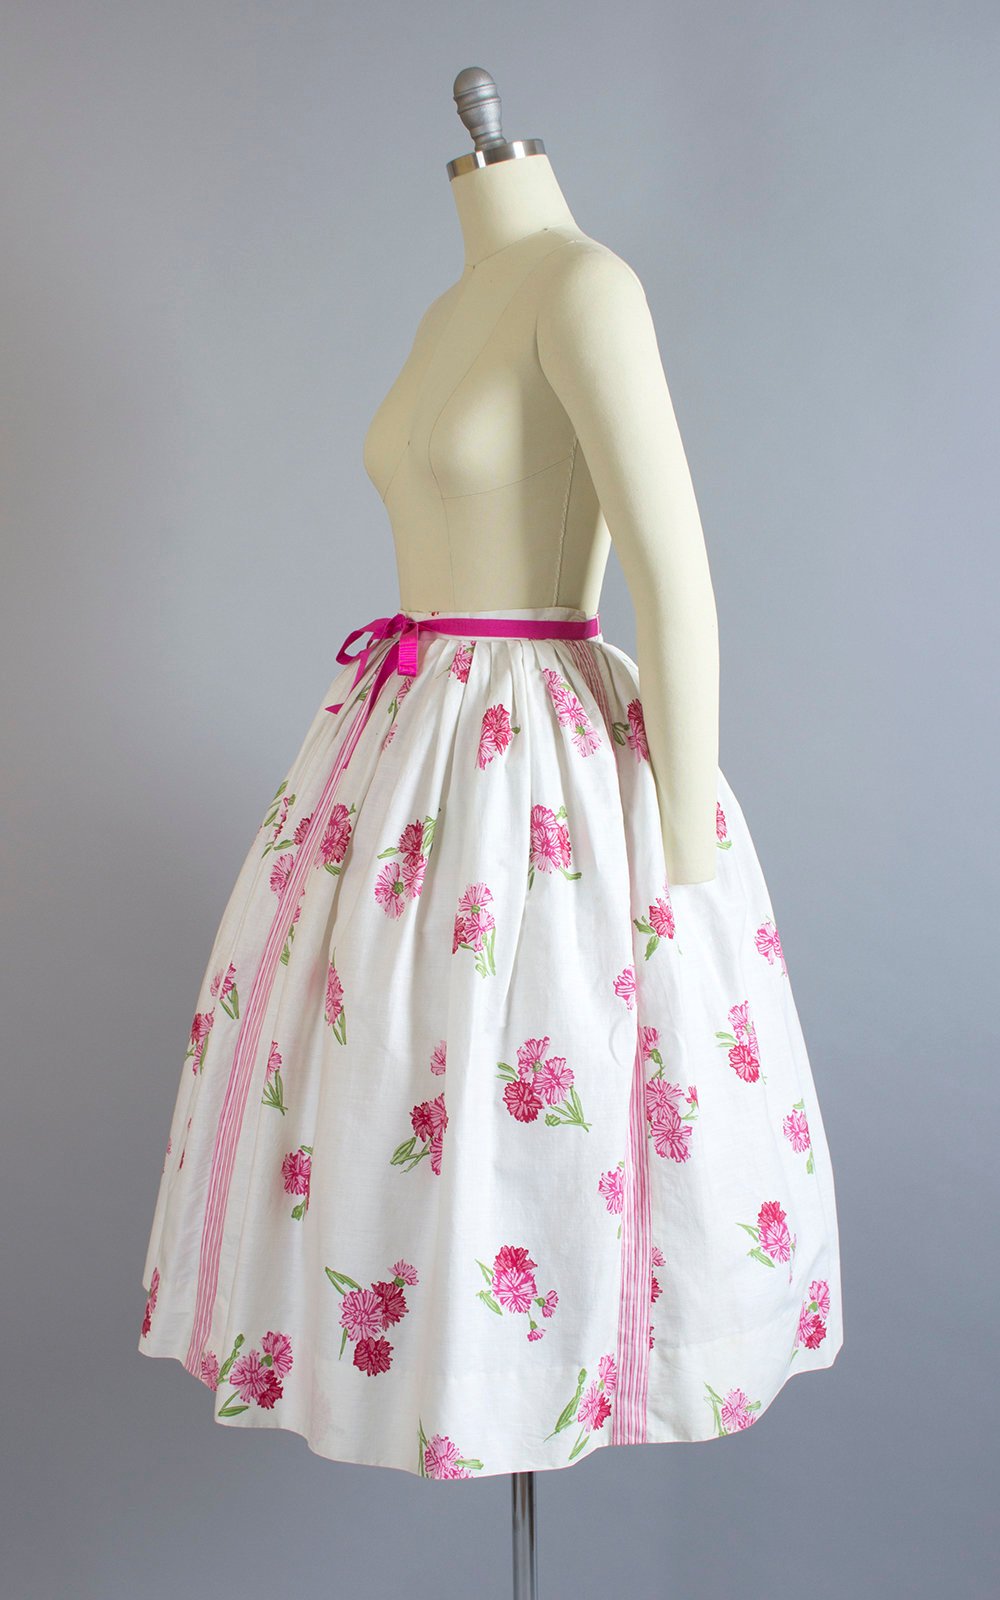 Vintage 1950s Skirt | 50s Floral Striped Printed Cotton White Pink Full Swing Skirt (xs/small)